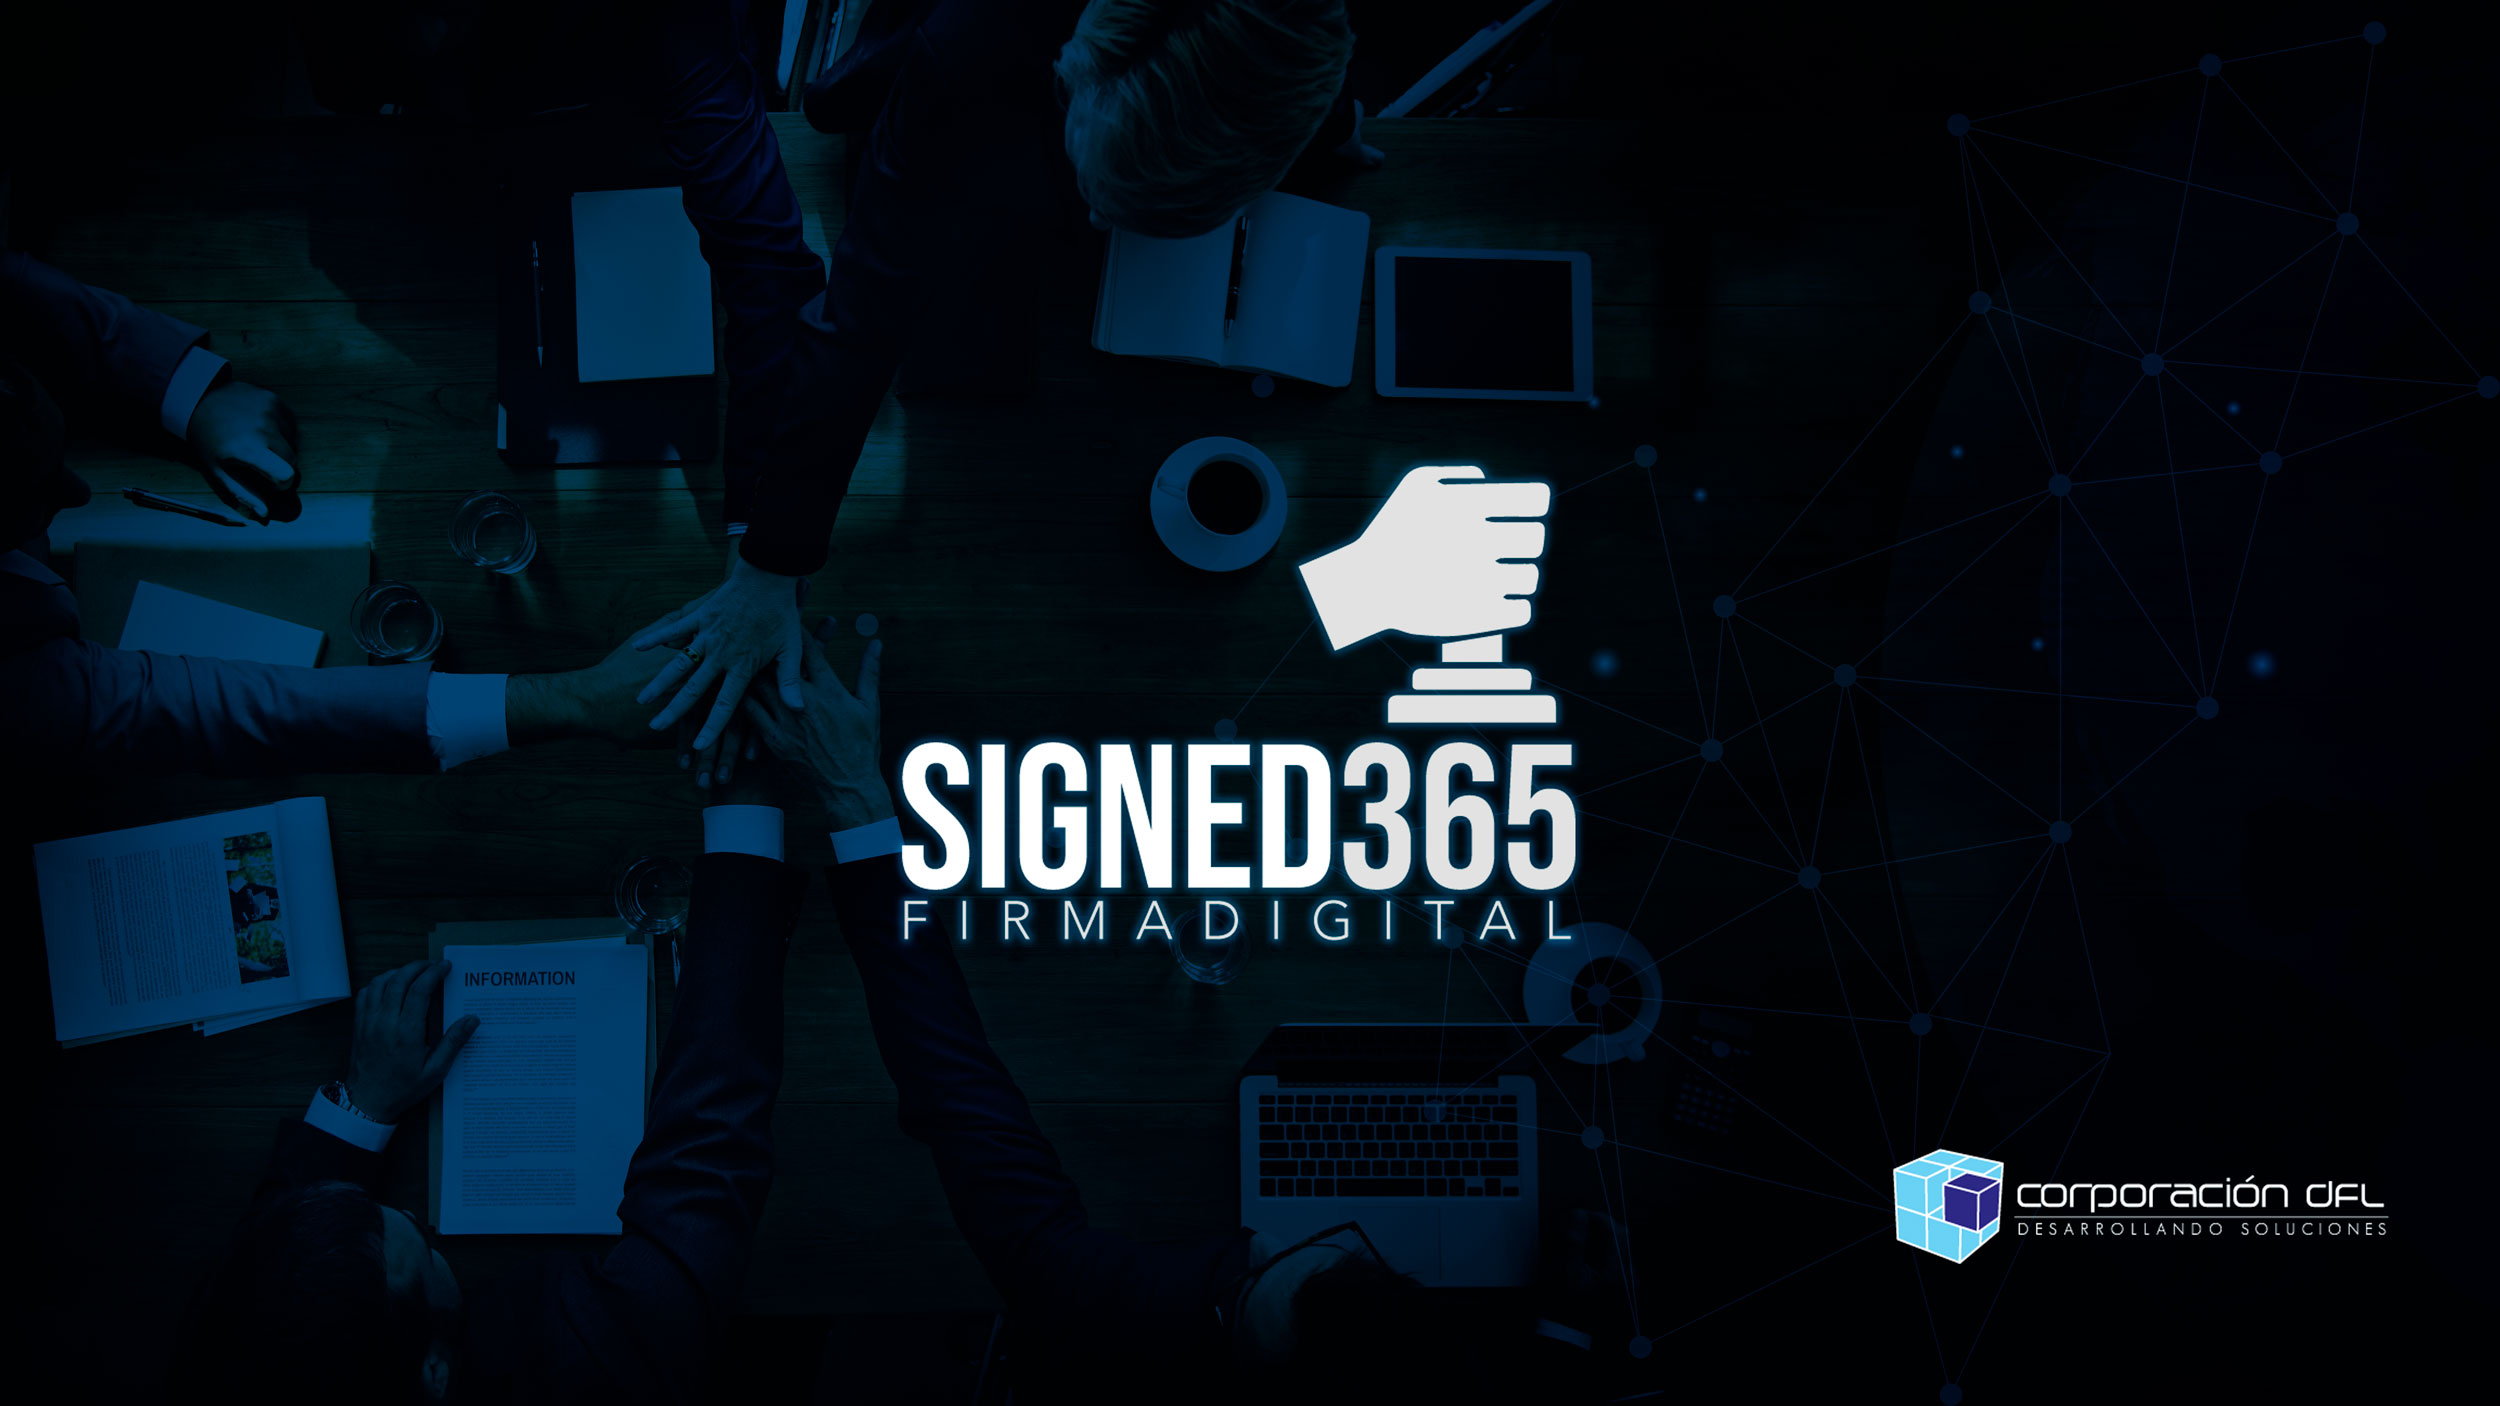 SIGNED365